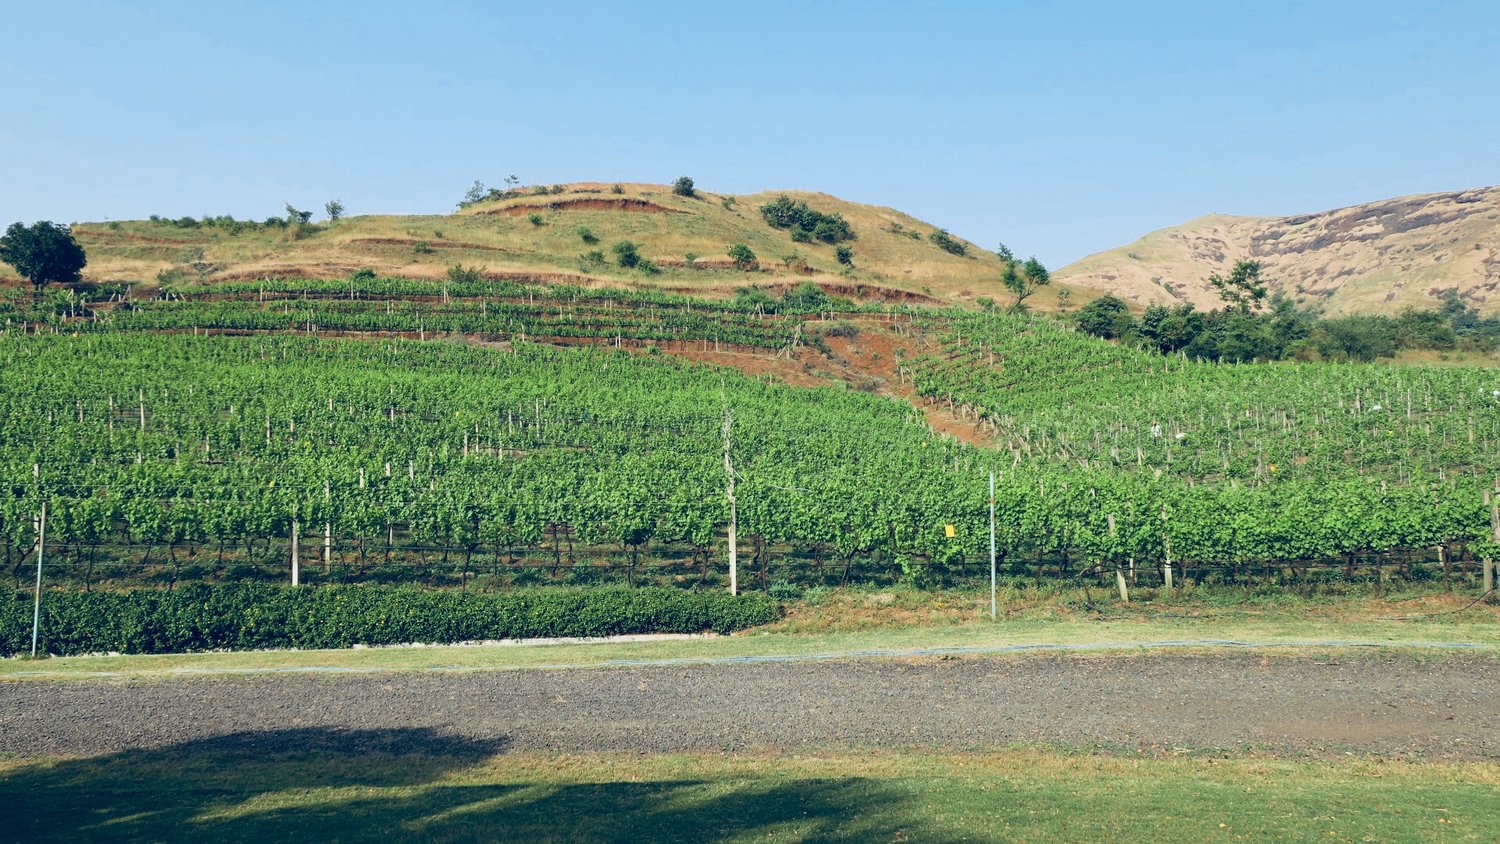 The plot from where Grover Zampa's "One Tree Hill Vineyard" wines are produced. (Igatpuri, Nasik, India) - Photo credit: Sumi_Sumilier